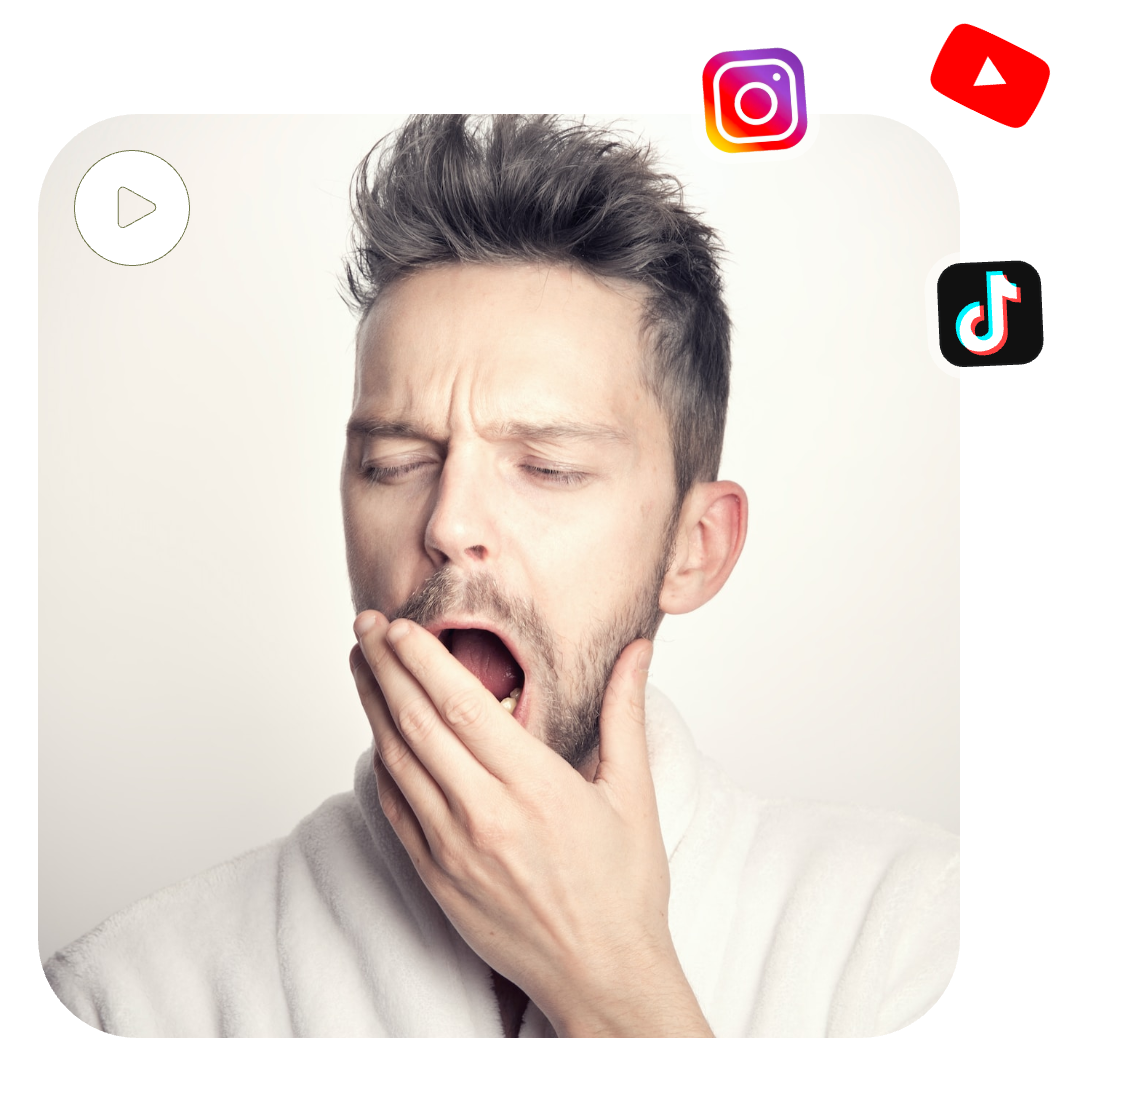 a meme video of a man yawning and icons of Instagram, YouTube, and TikTok